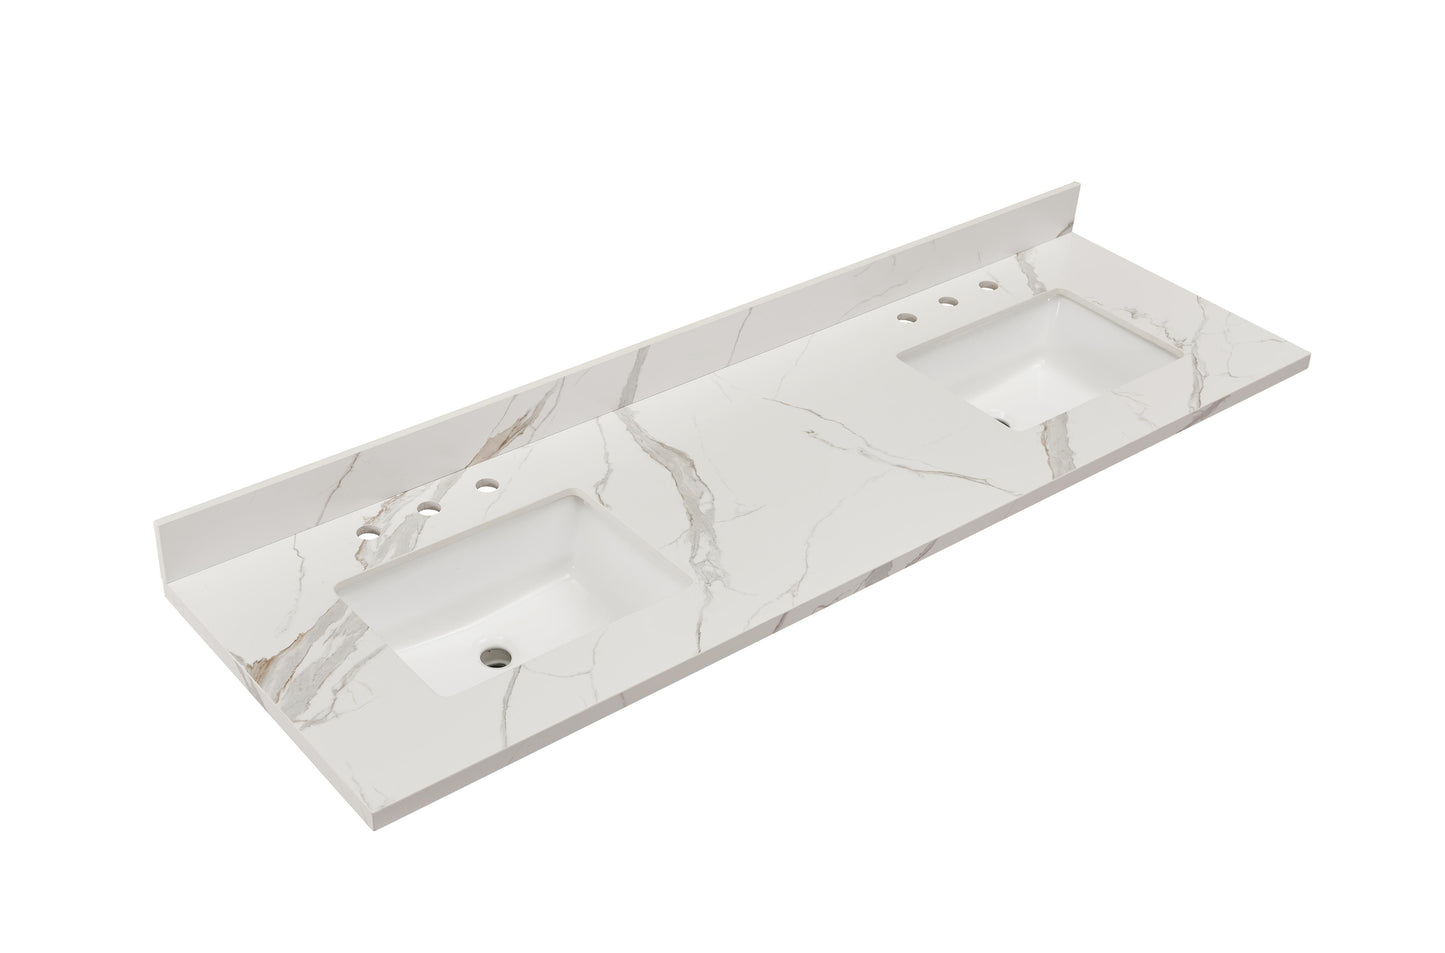 Stone effects Vanity Top in Calacatta White with White Sink